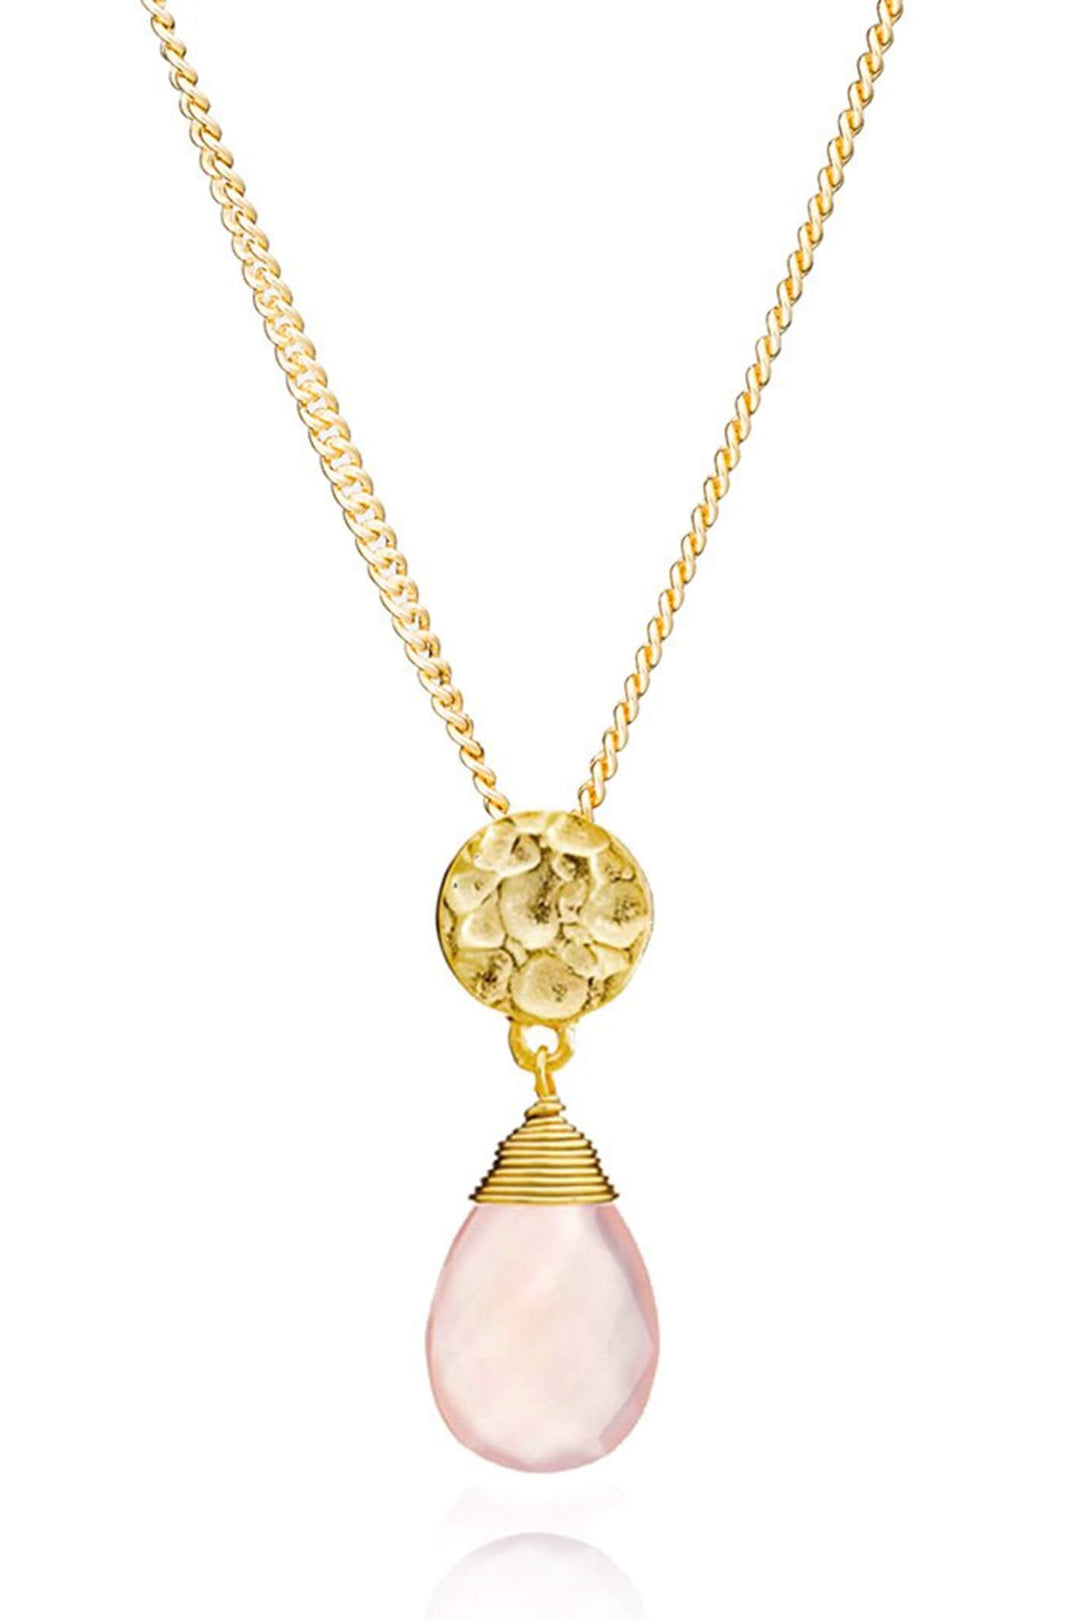 Azuni Classic Athena Pink Chalcedony Necklace - Experience Boutique